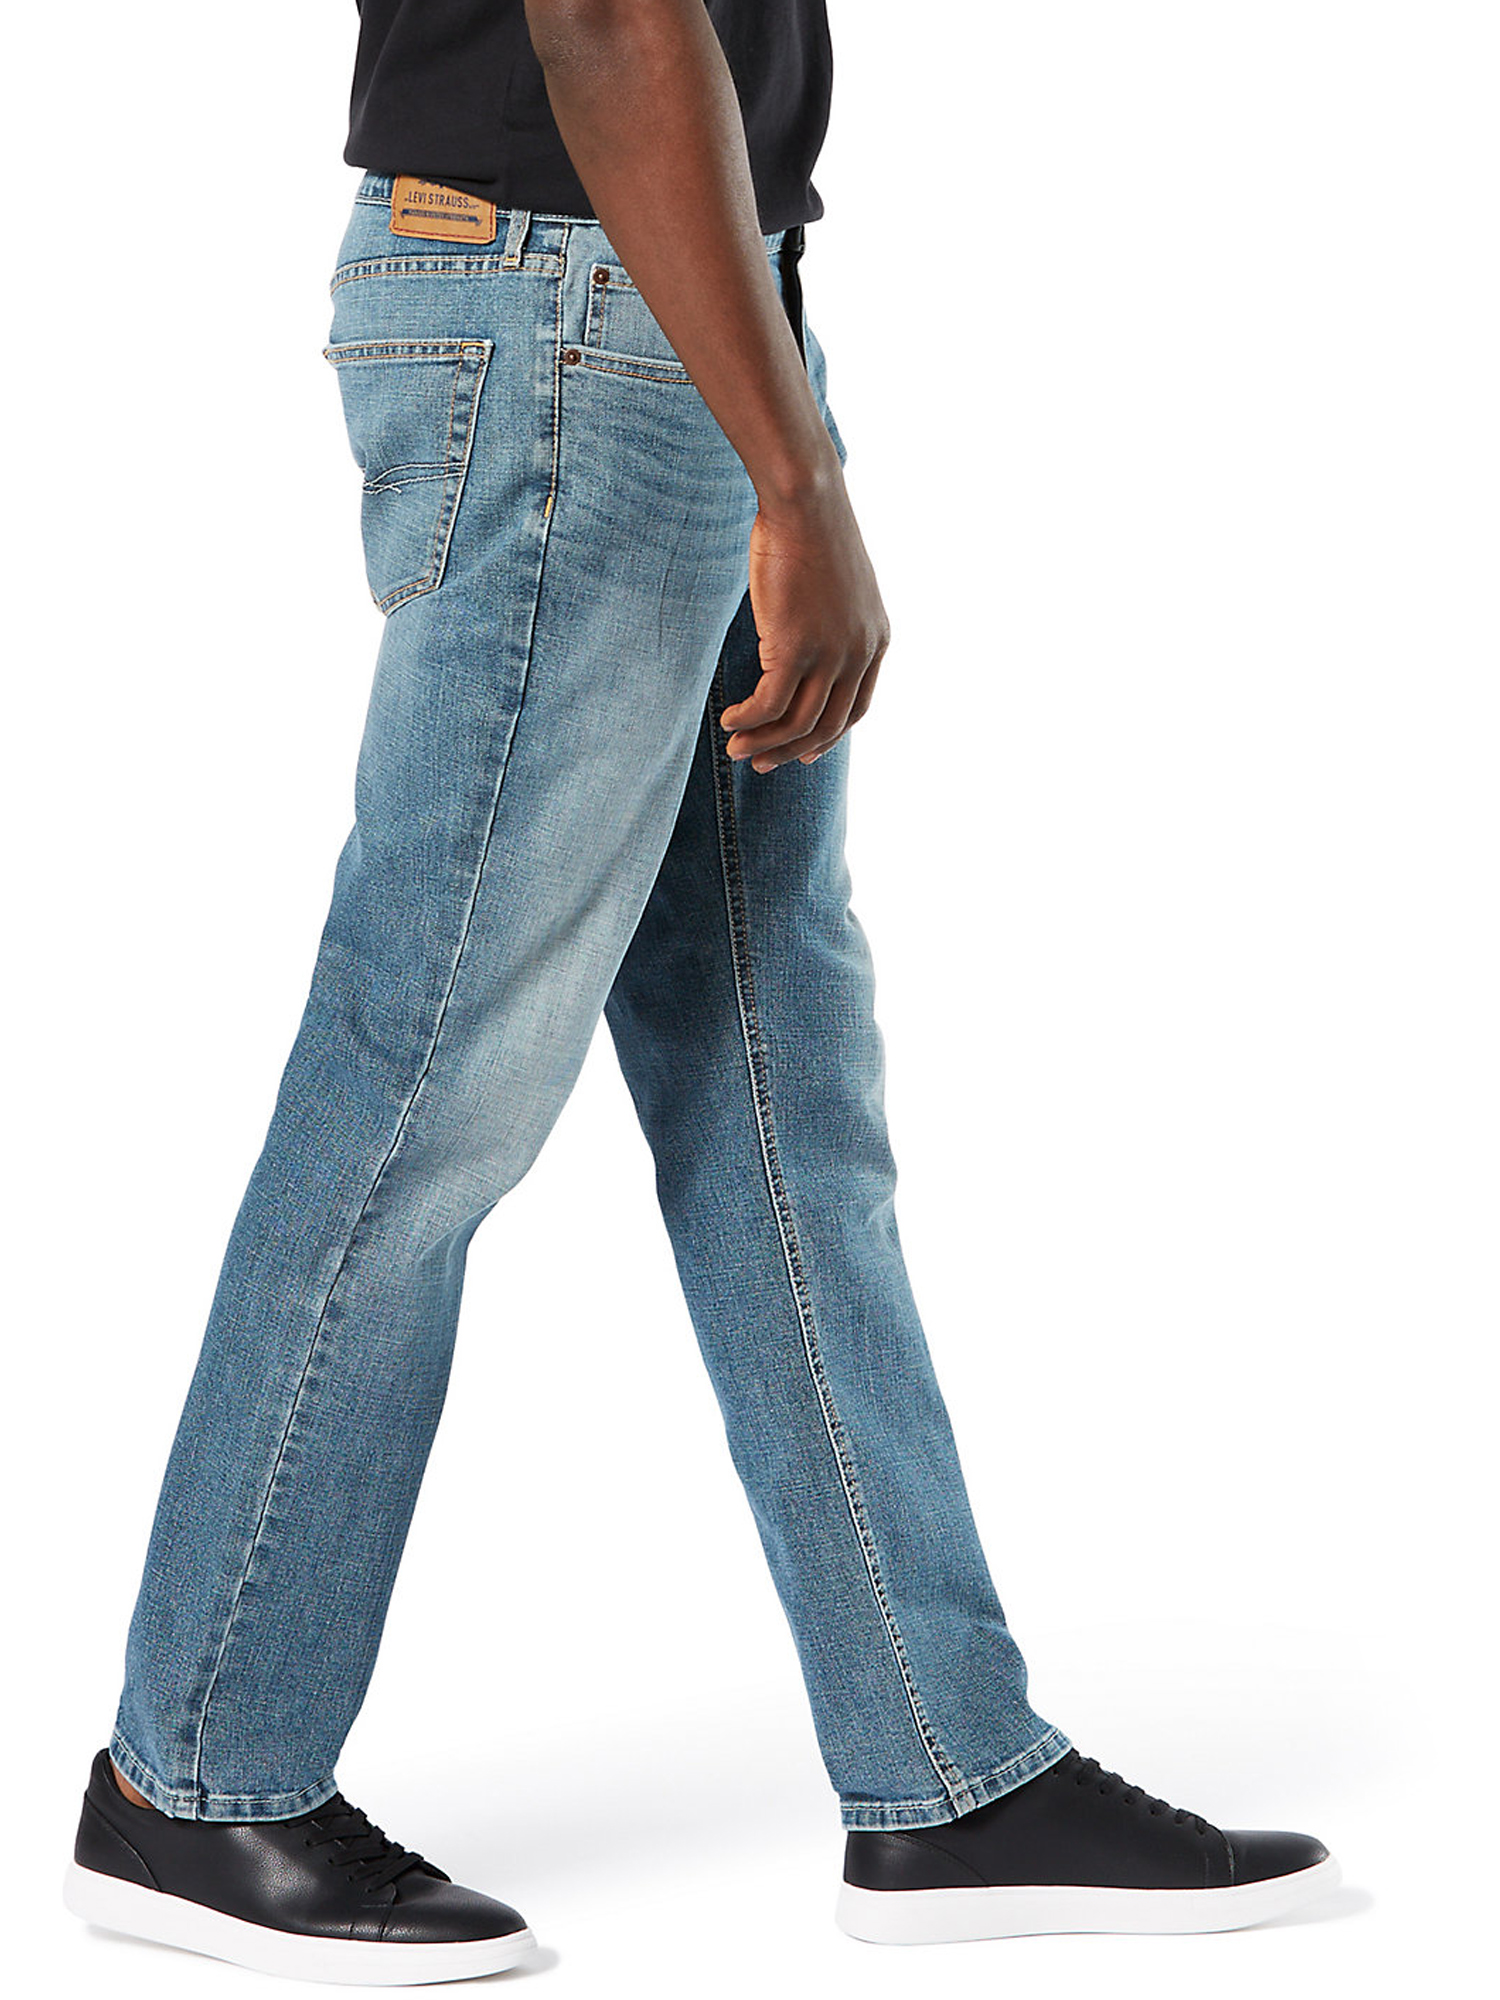 Signature by Levi Strauss & Co. Men's and Big and Tall Athletic Fit Jeans - image 2 of 5